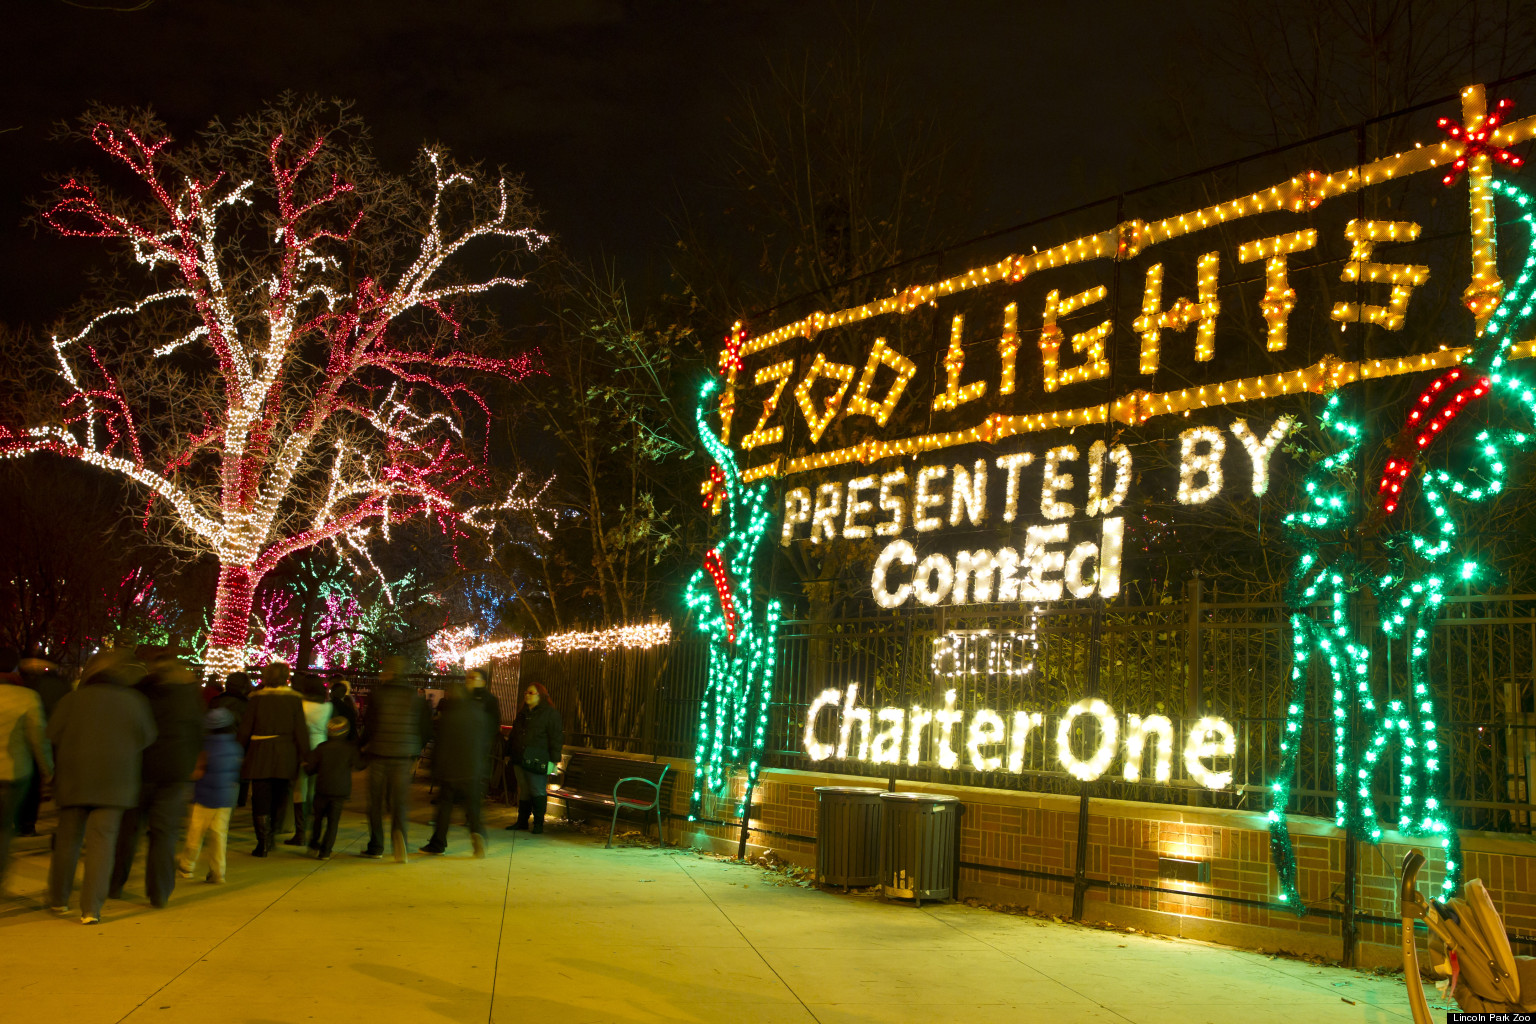 Lincoln Park Zoo Lights Ignite The Holiday Skies (PHOTOS)